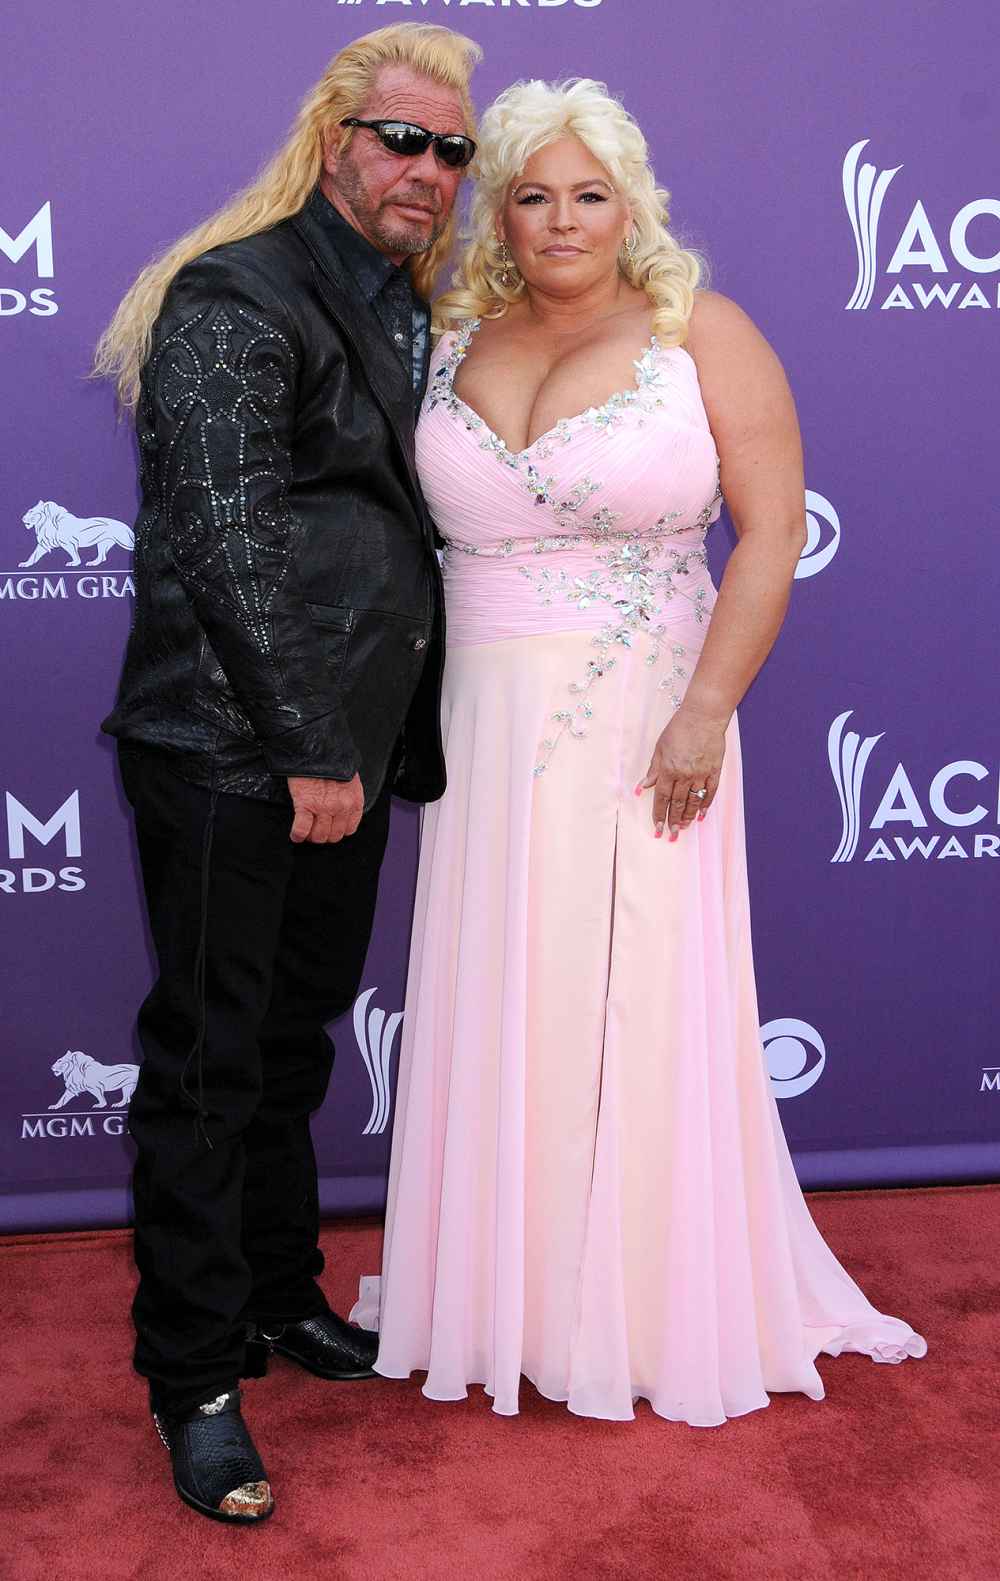 Dog the Bounty Hunter Duane Chapman Engaged to Francie Frane After Beth Chapman Death